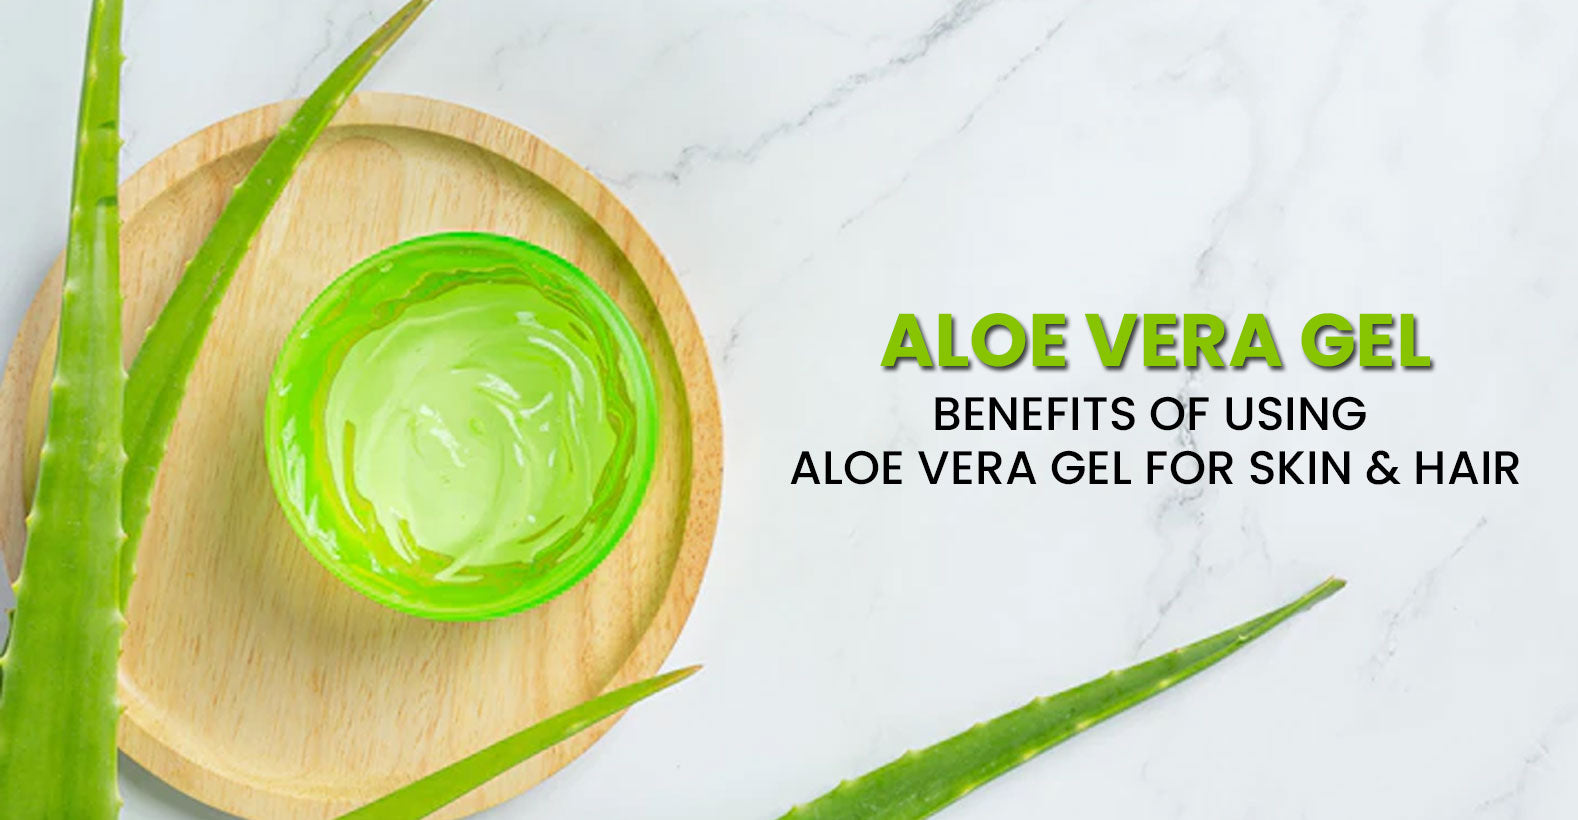 Amazing Aloe Vera Gel Benefits for Face, Hair and Skin!